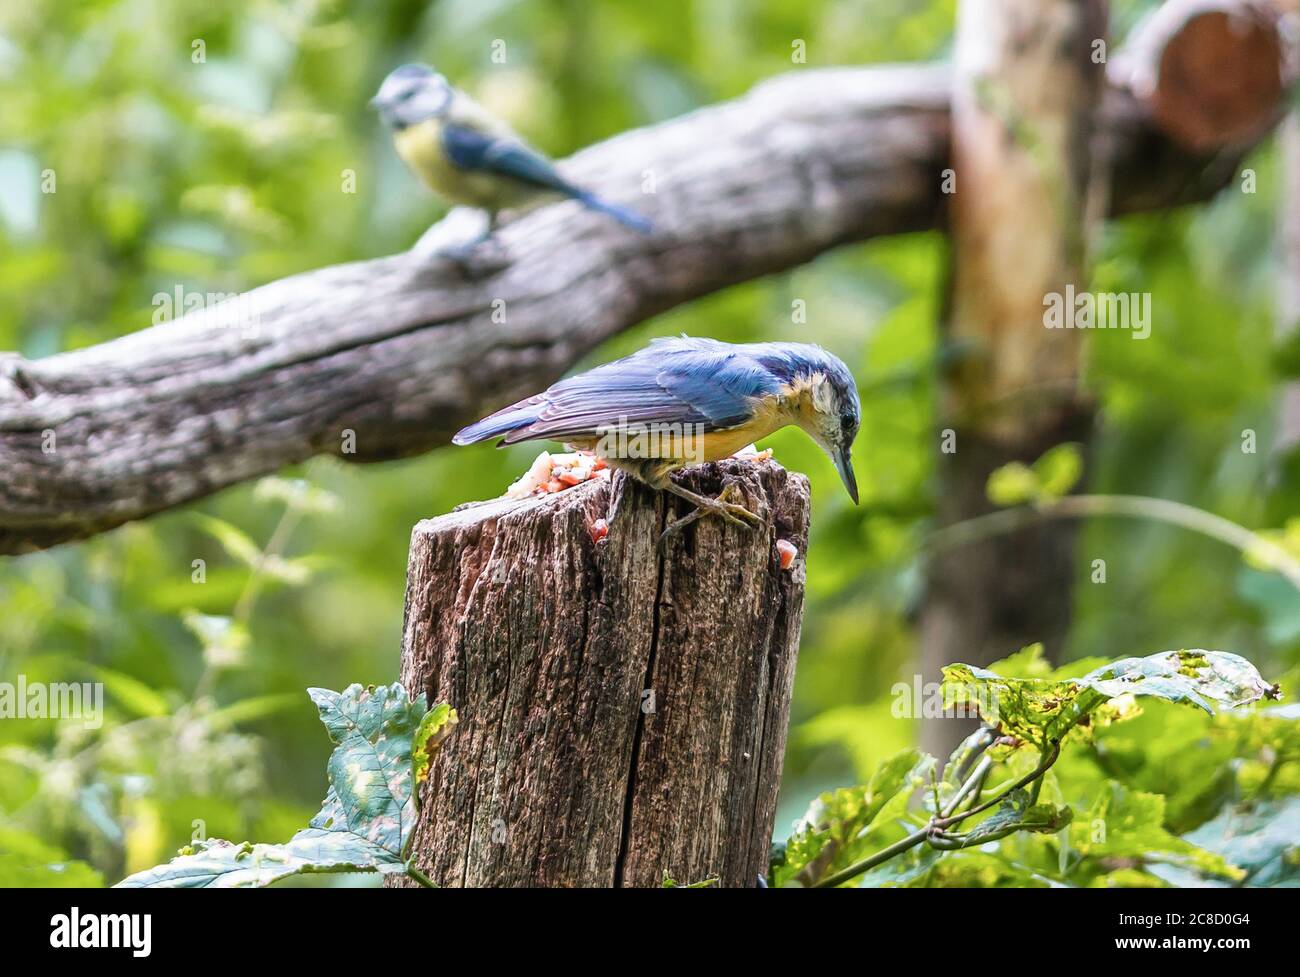 A male Eurasian nuthatch - Sitta europaea bird - perched on a tree stump in the woodland of Koenigsheide in Berlin Johannisthal, Germany, Europe Stock Photo